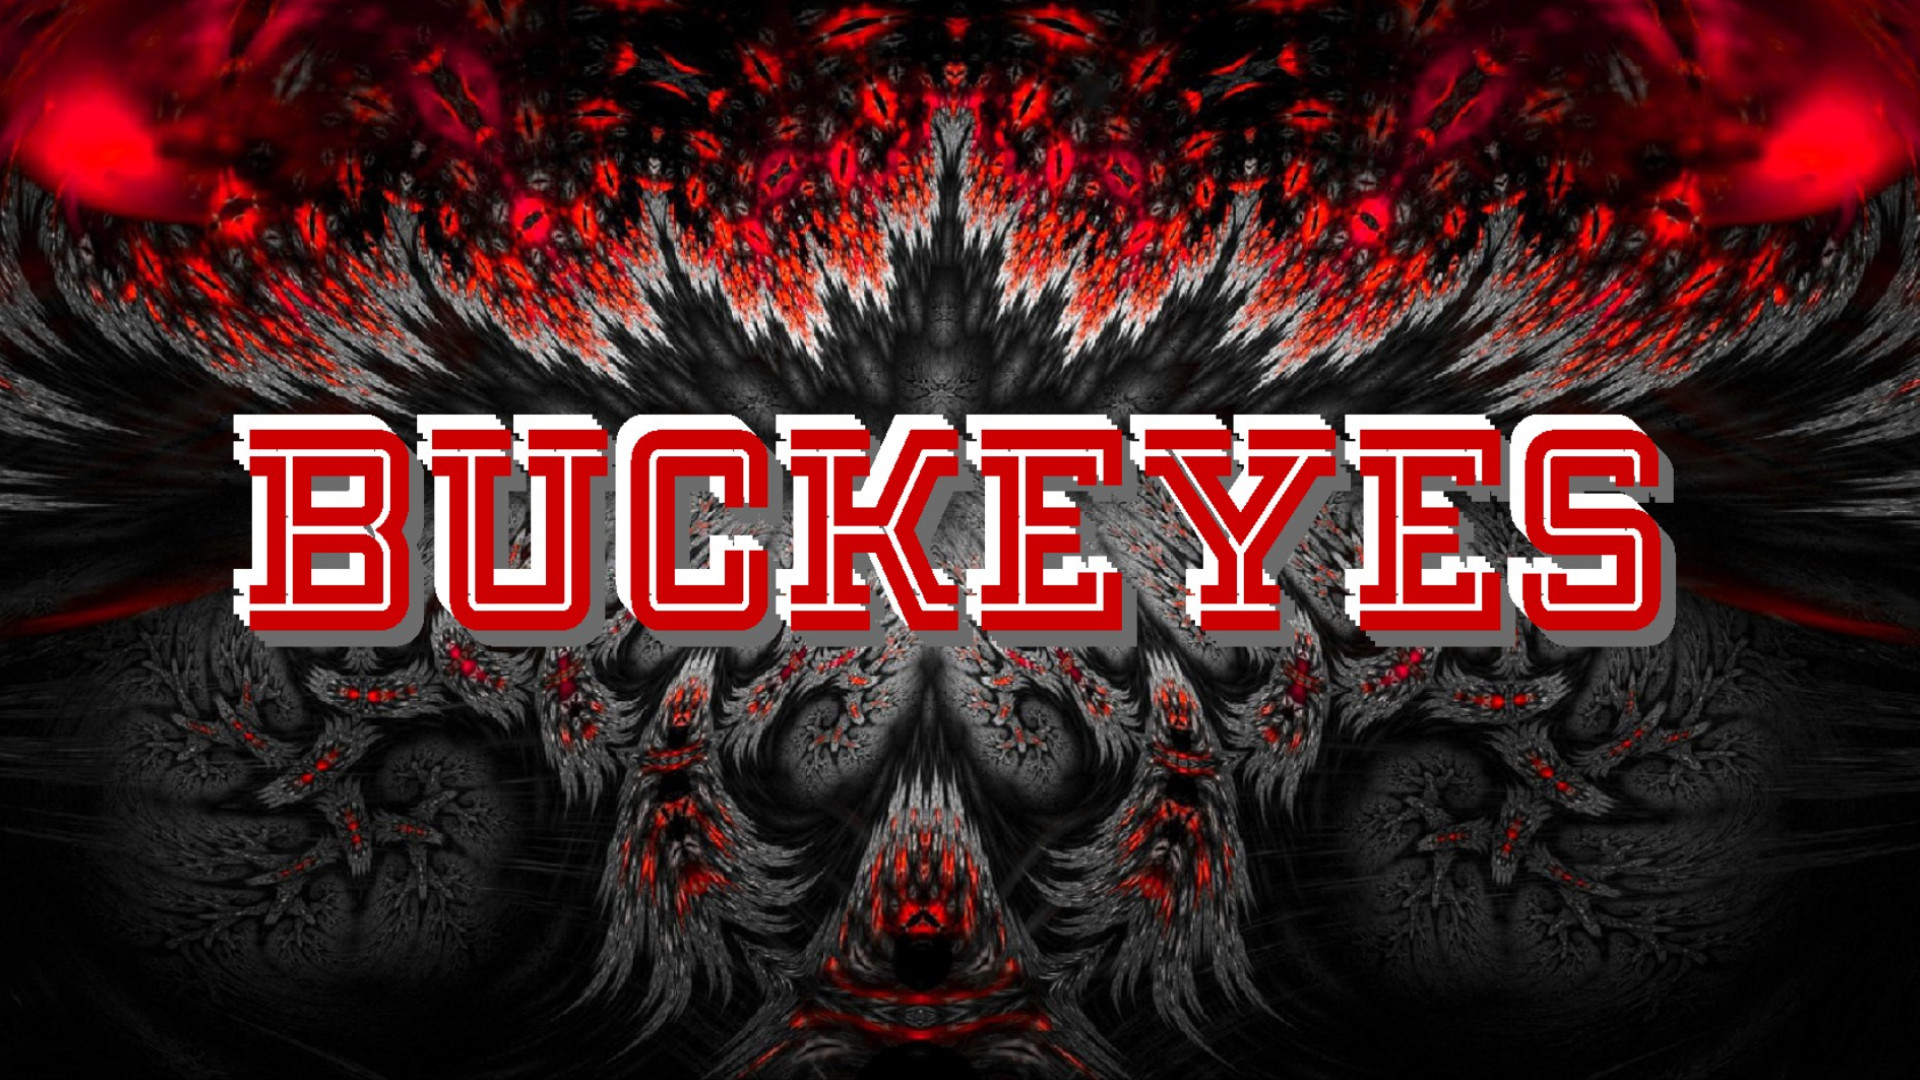 1920x1080 Ohio State Buckeyes images BUCKEYES ON AN ABSTRACT HD wallpaper and  background photos